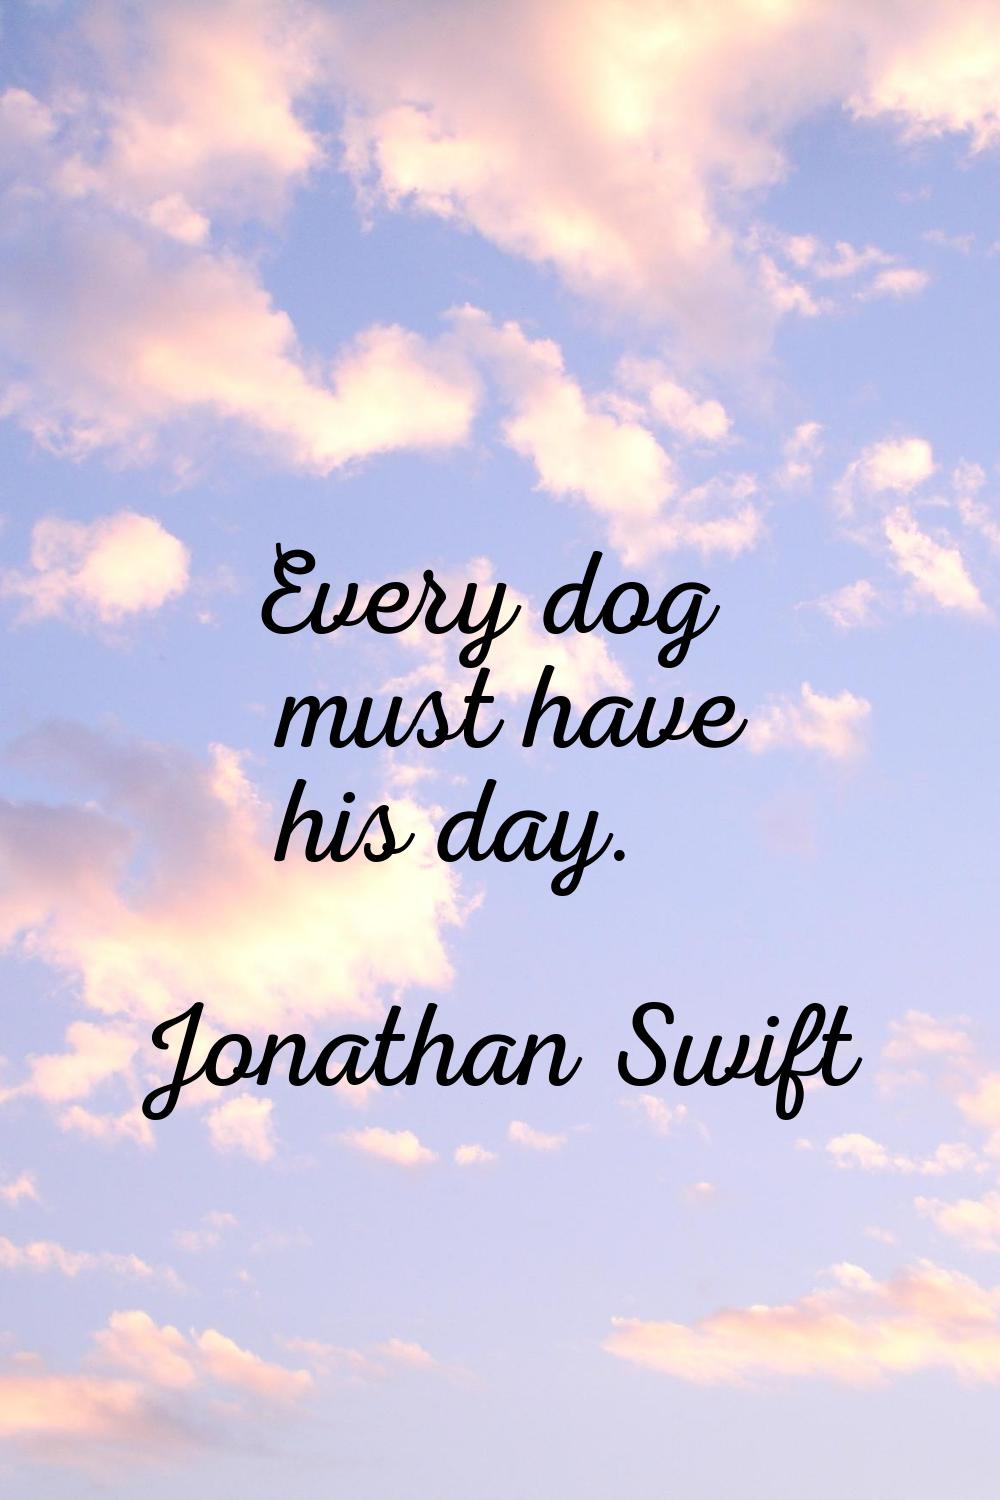 Every dog must have his day.